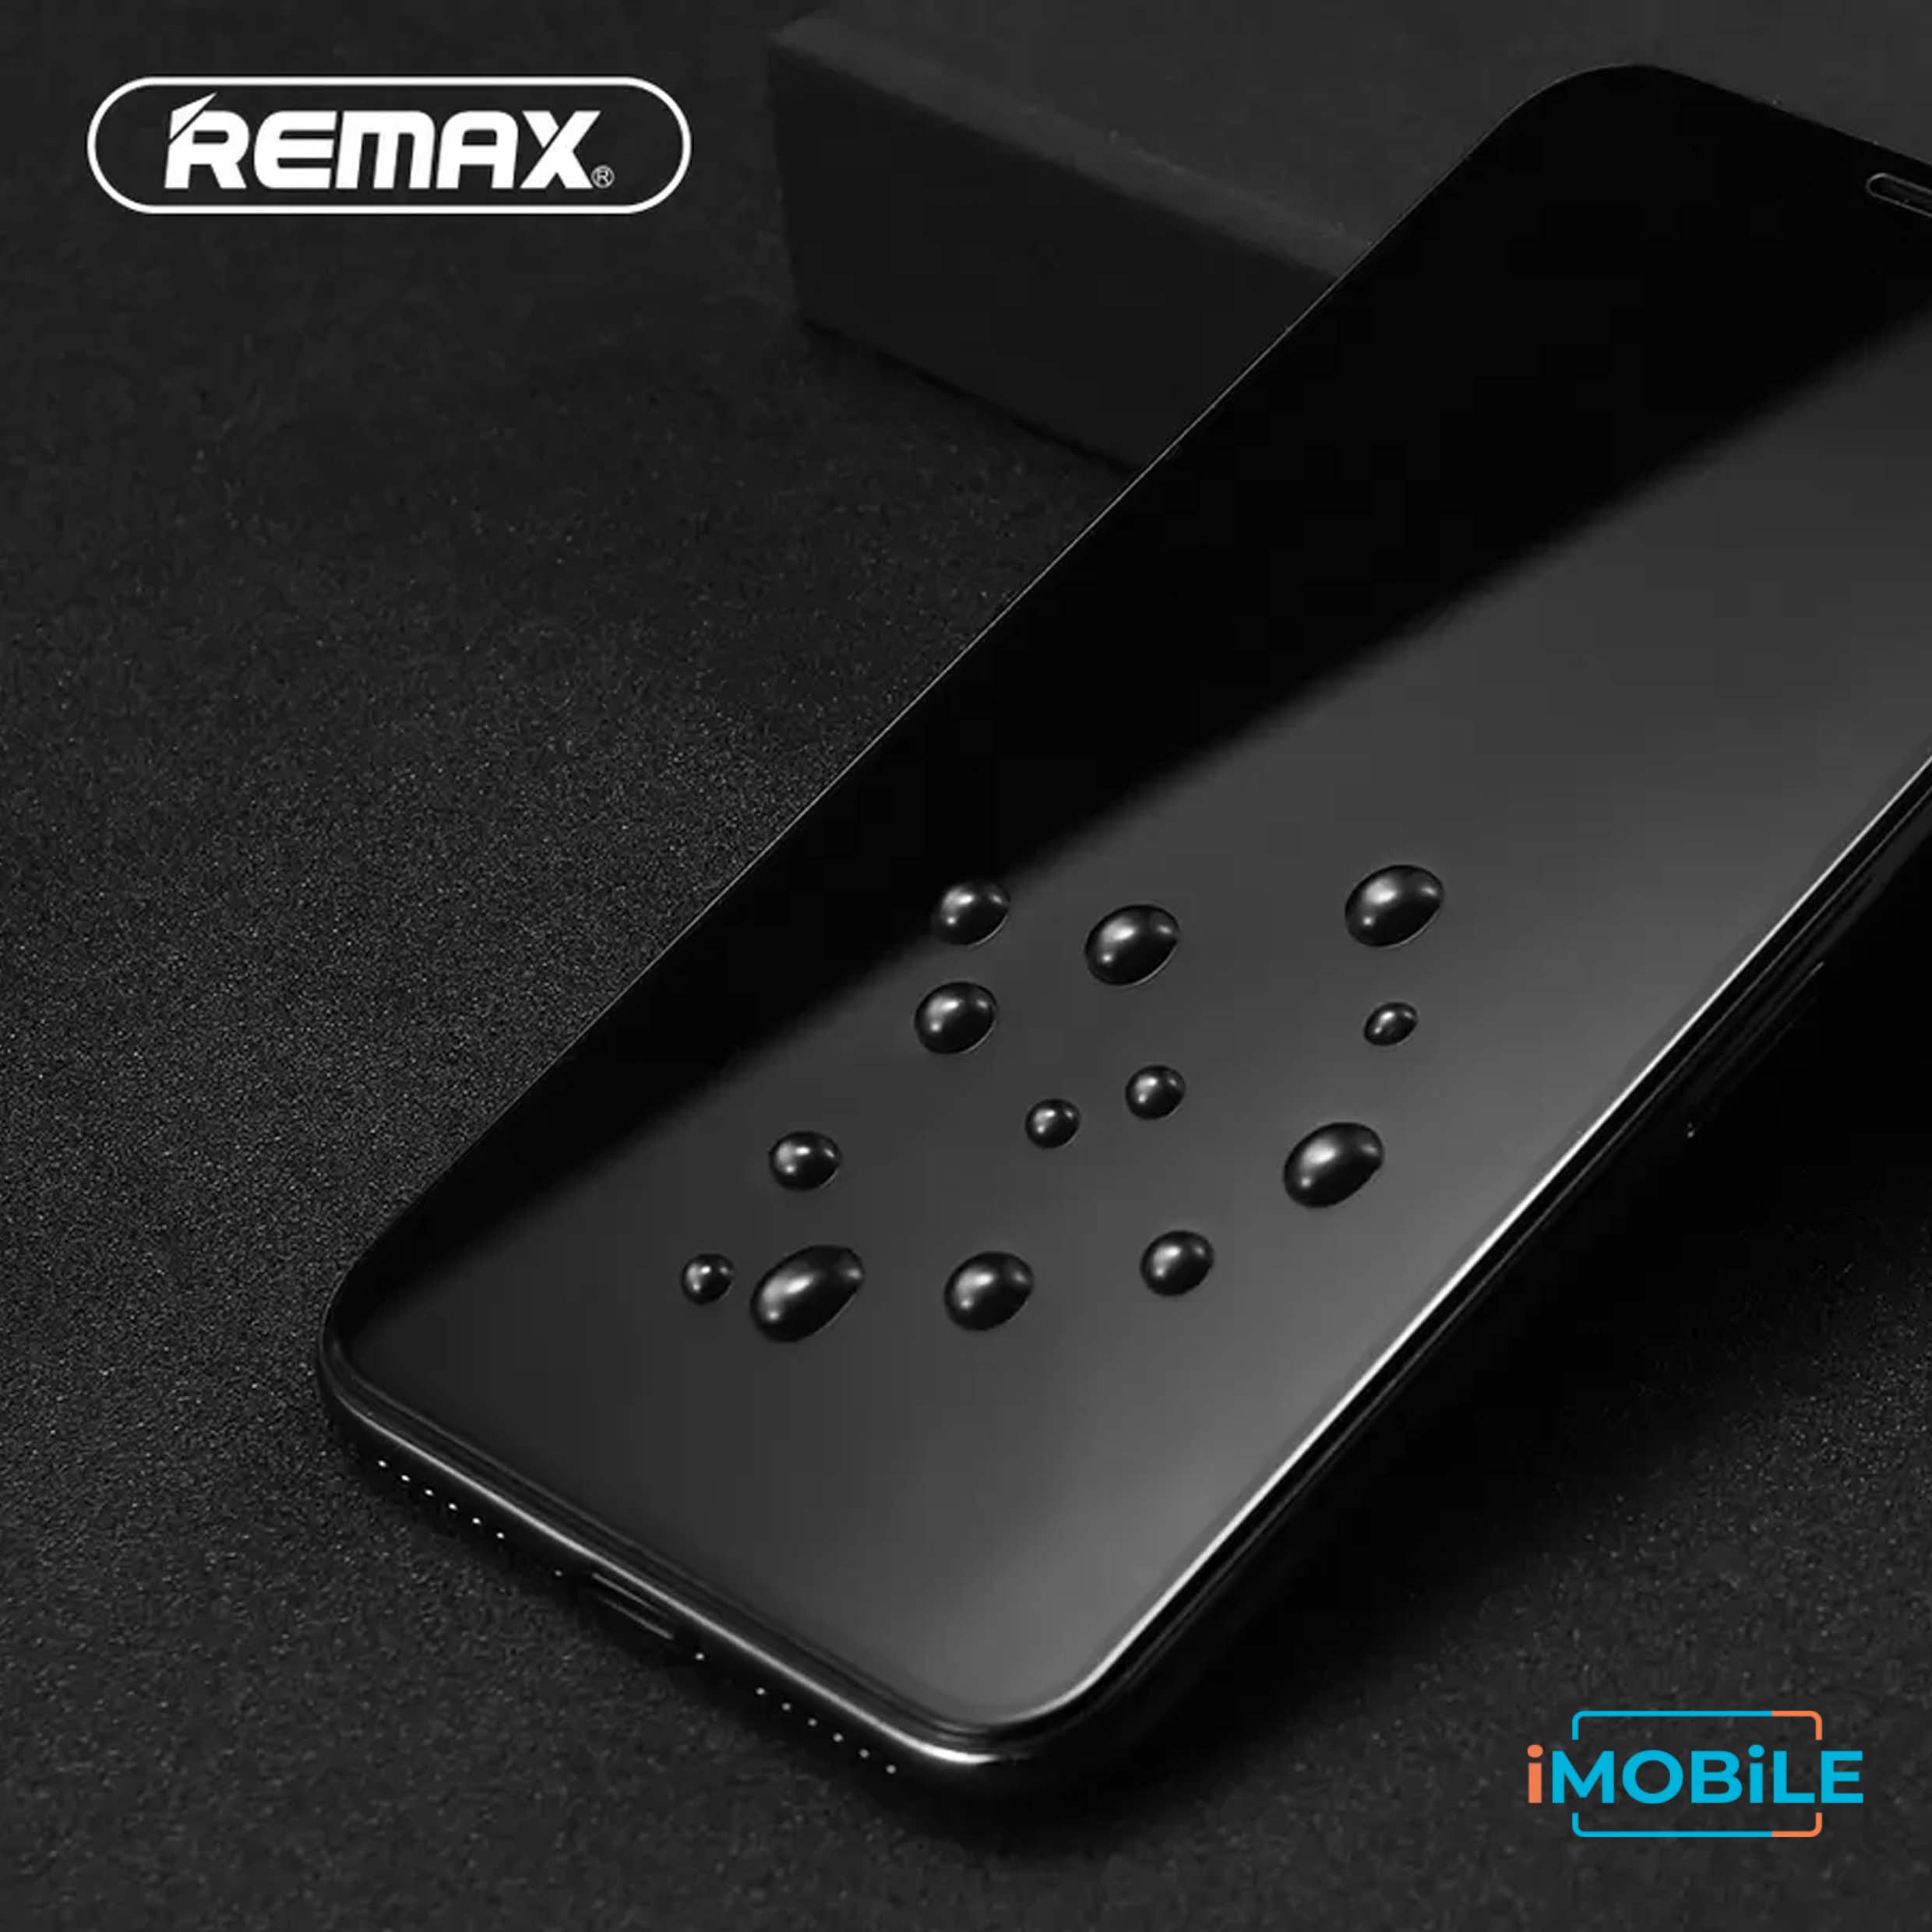 Remax 2.5D Tempered Glass with Envelope Pack, iPhone 12 Mini